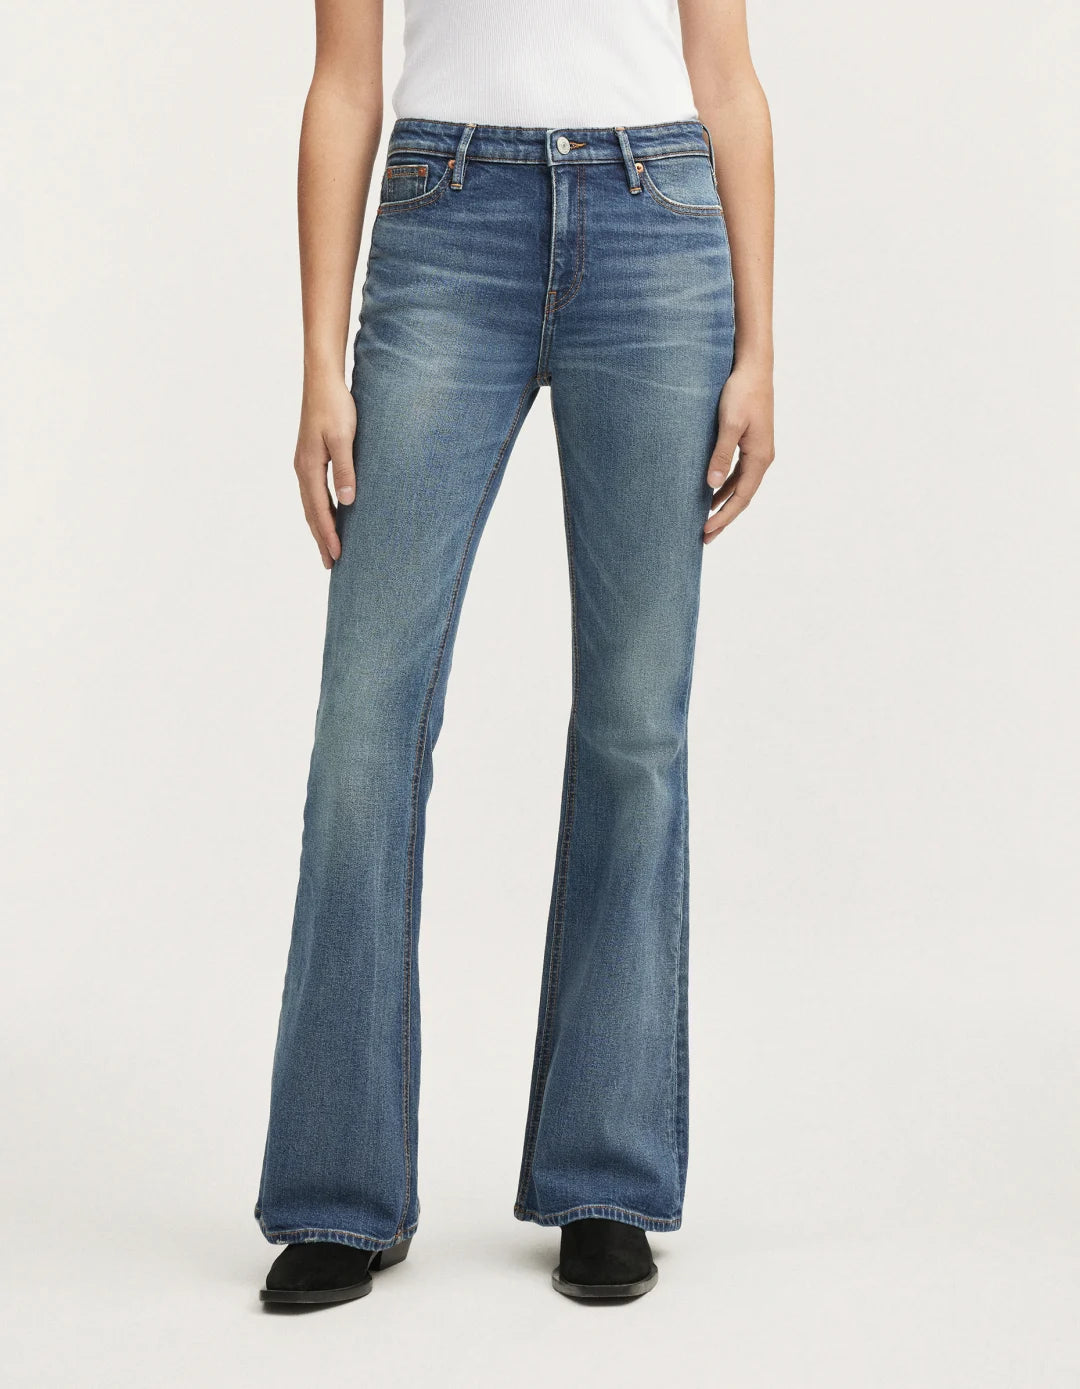 High rise flare jean in mid blue wash